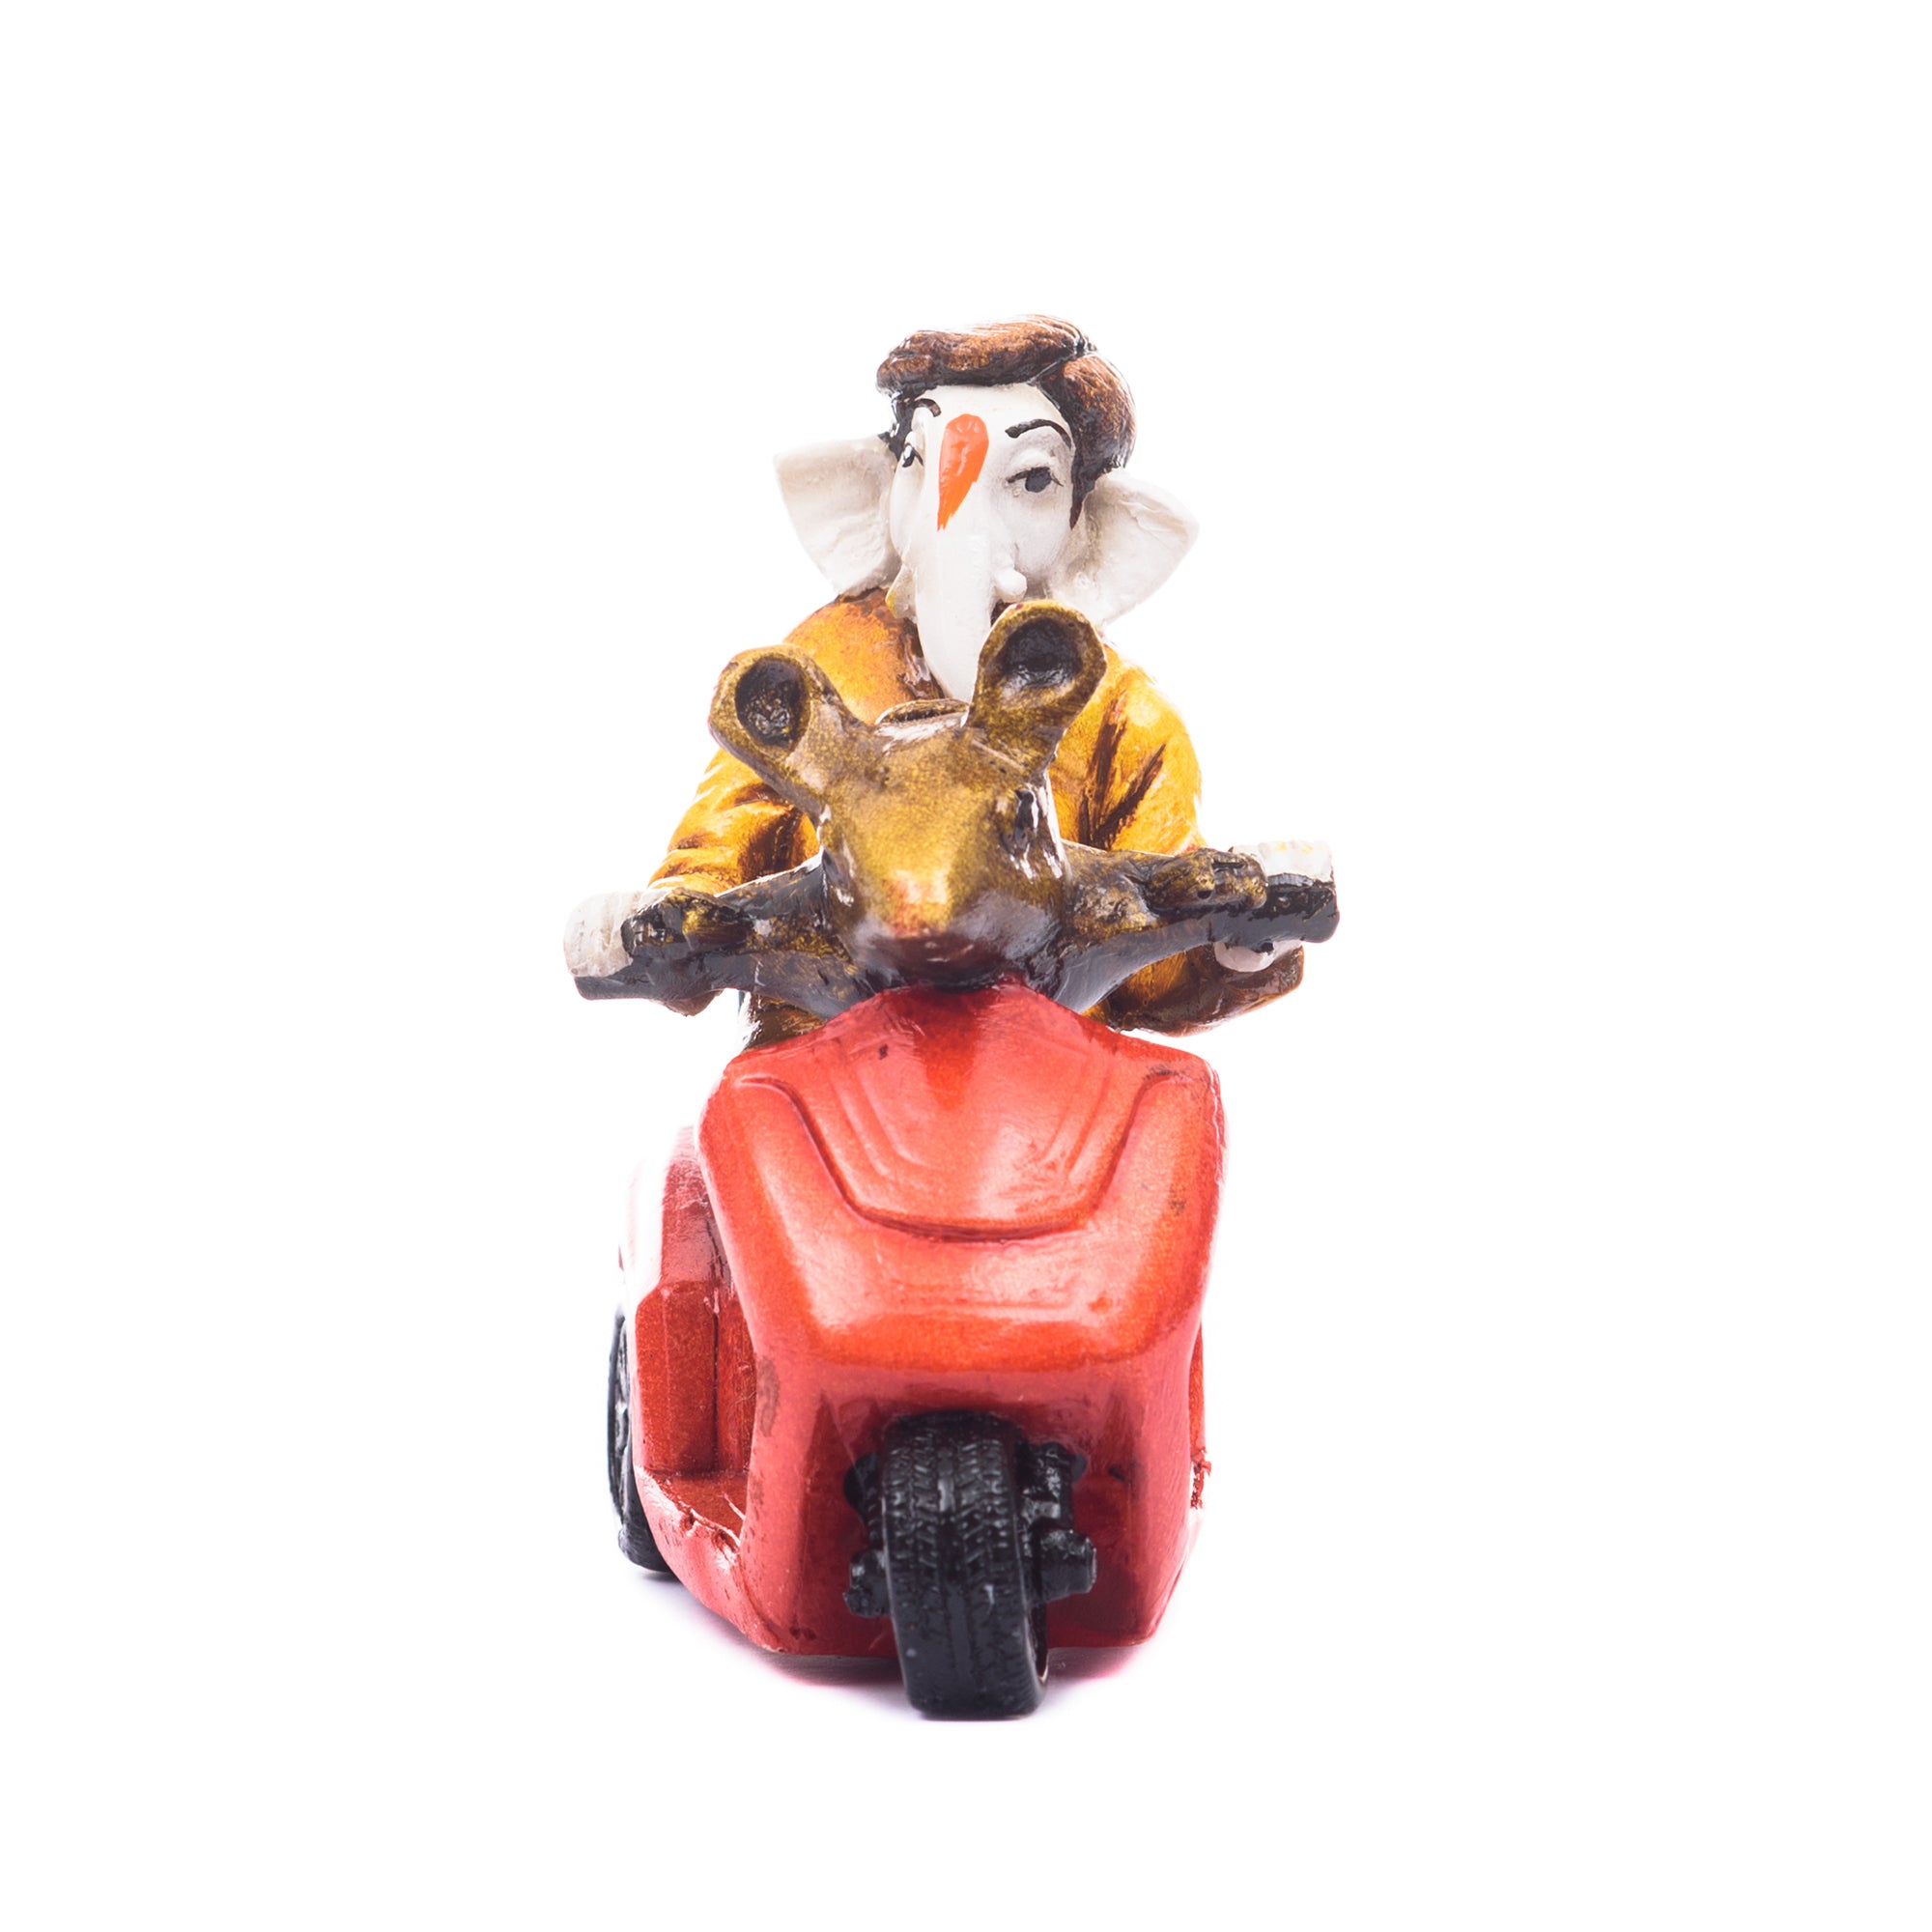 Polyresin Lord Ganesha Idol riding Scooter (Red and Yellow) 3